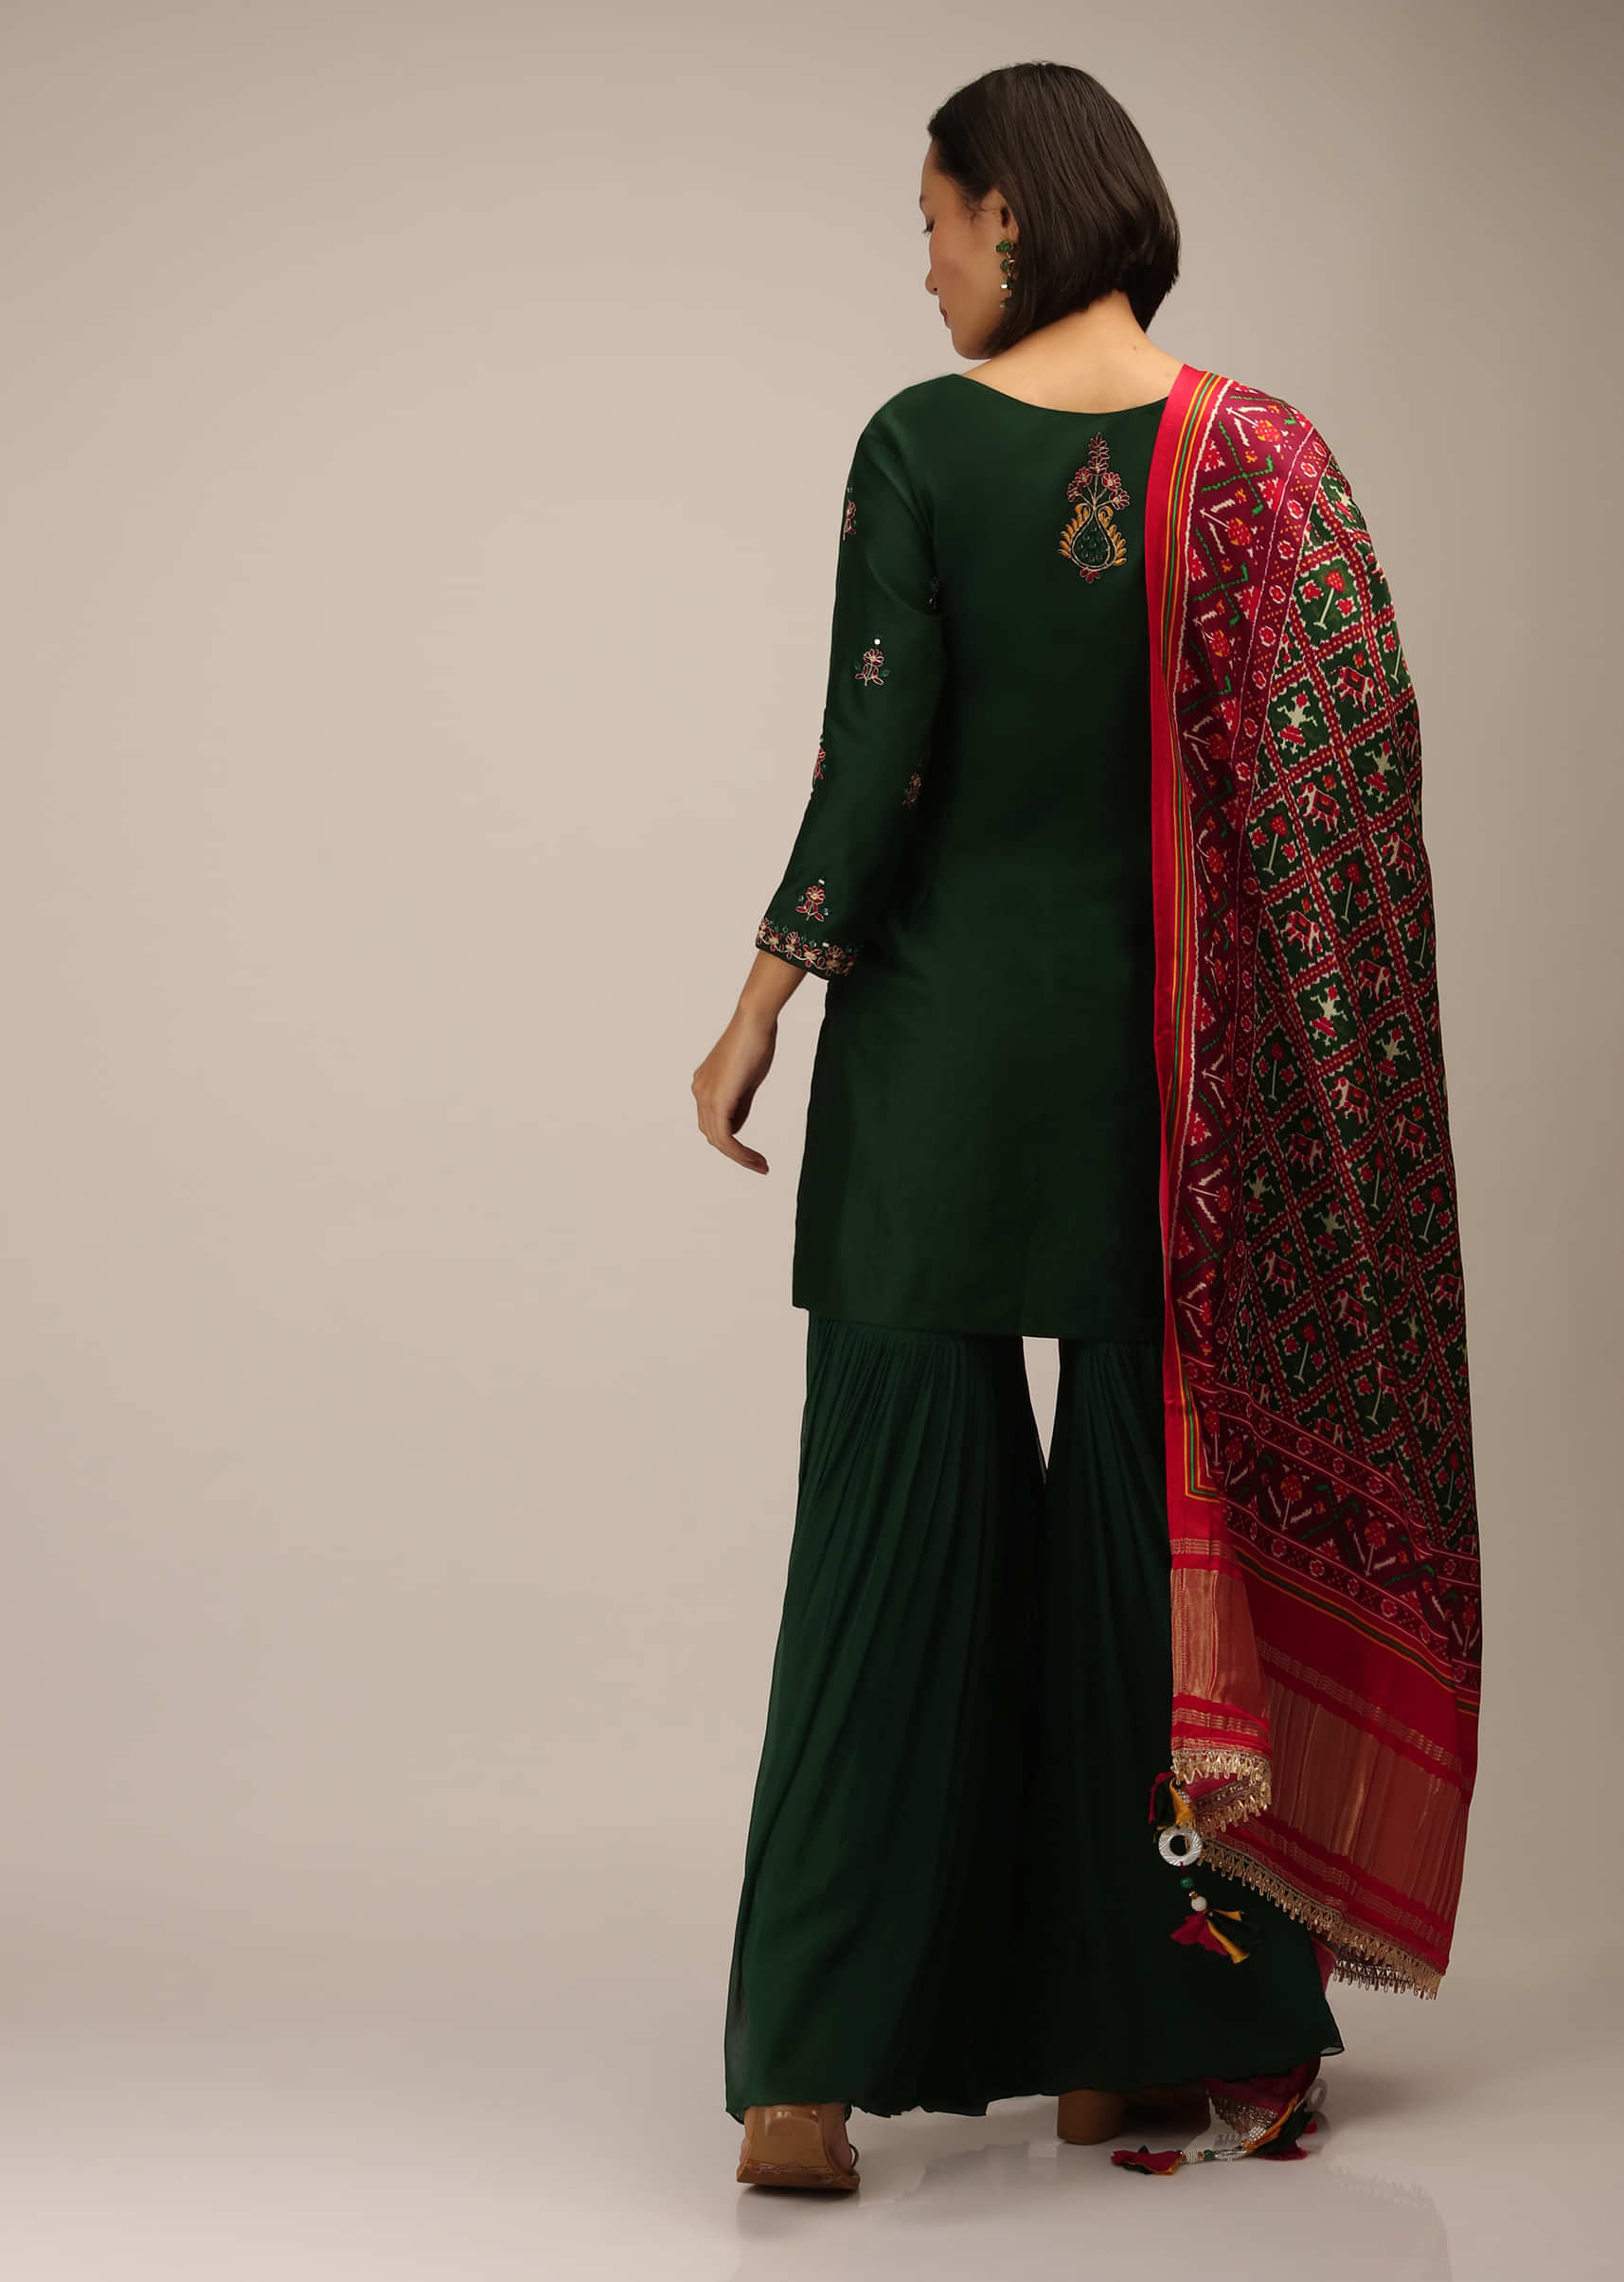 Buy Hunter Green Sharara Suit In Cotton Silk With Multi Colored Embroidery And Satin Patola Dupatta